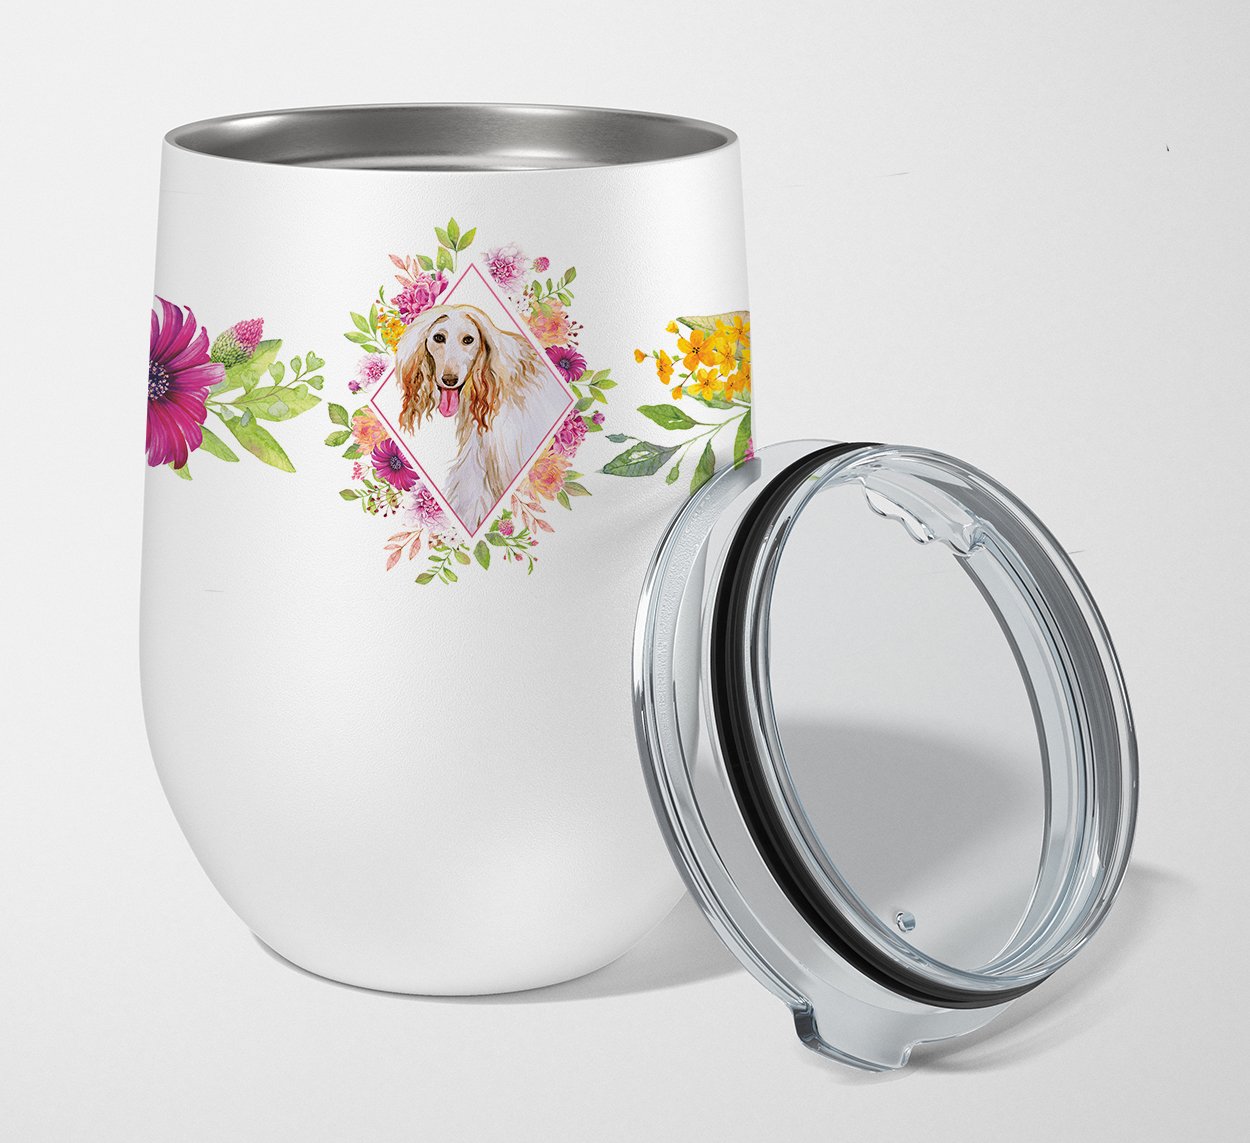 Afghan Hound Pink Flowers Stainless Steel 12 oz Stemless Wine Glass CK4110TBL12 by Caroline's Treasures